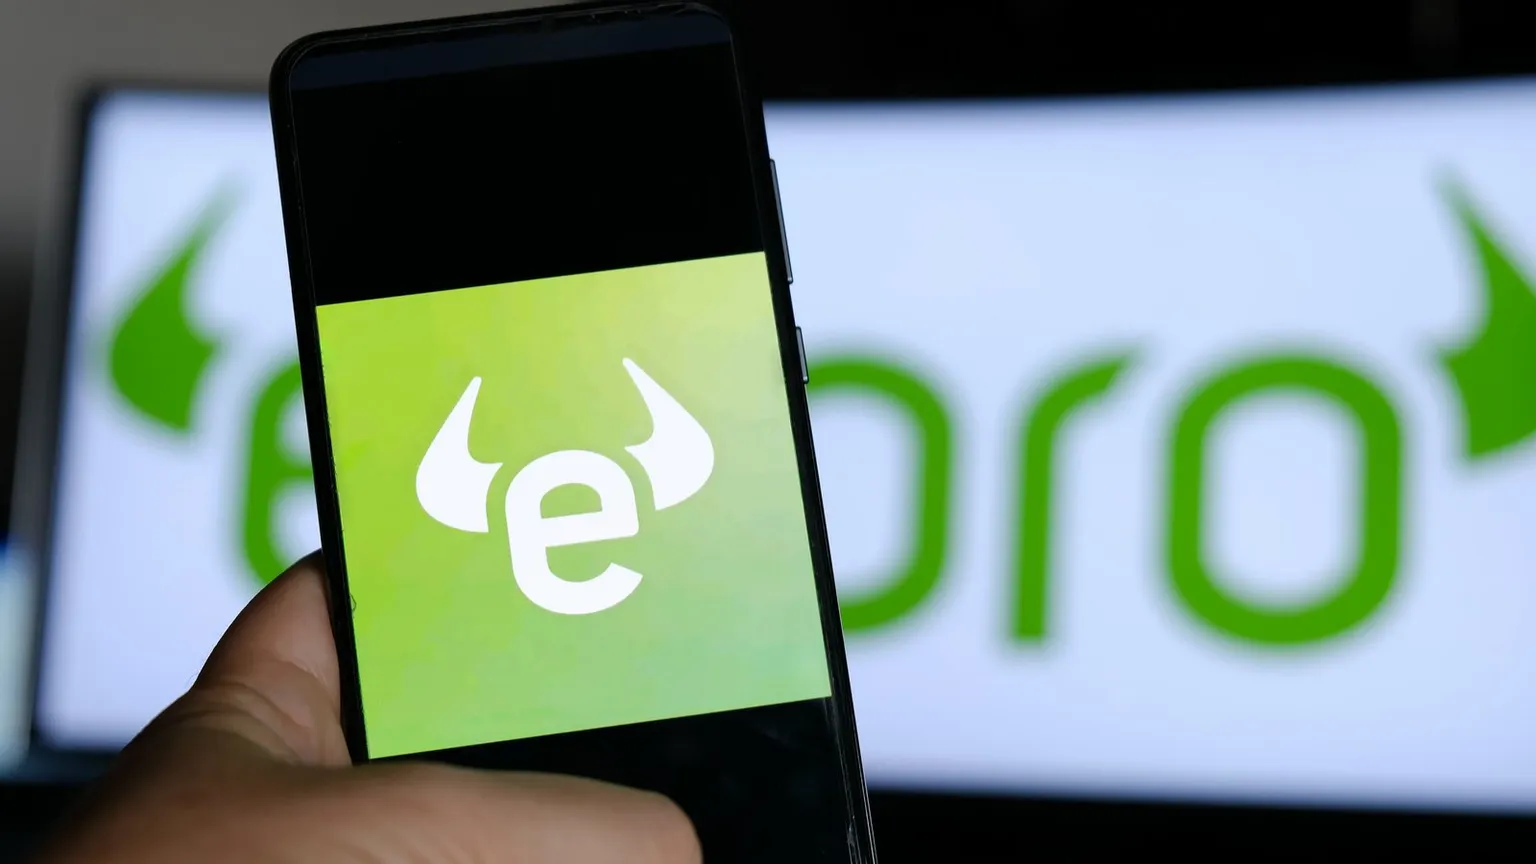 EToro now offers 18 cryptocurrencies in total. Image: Shutterstock